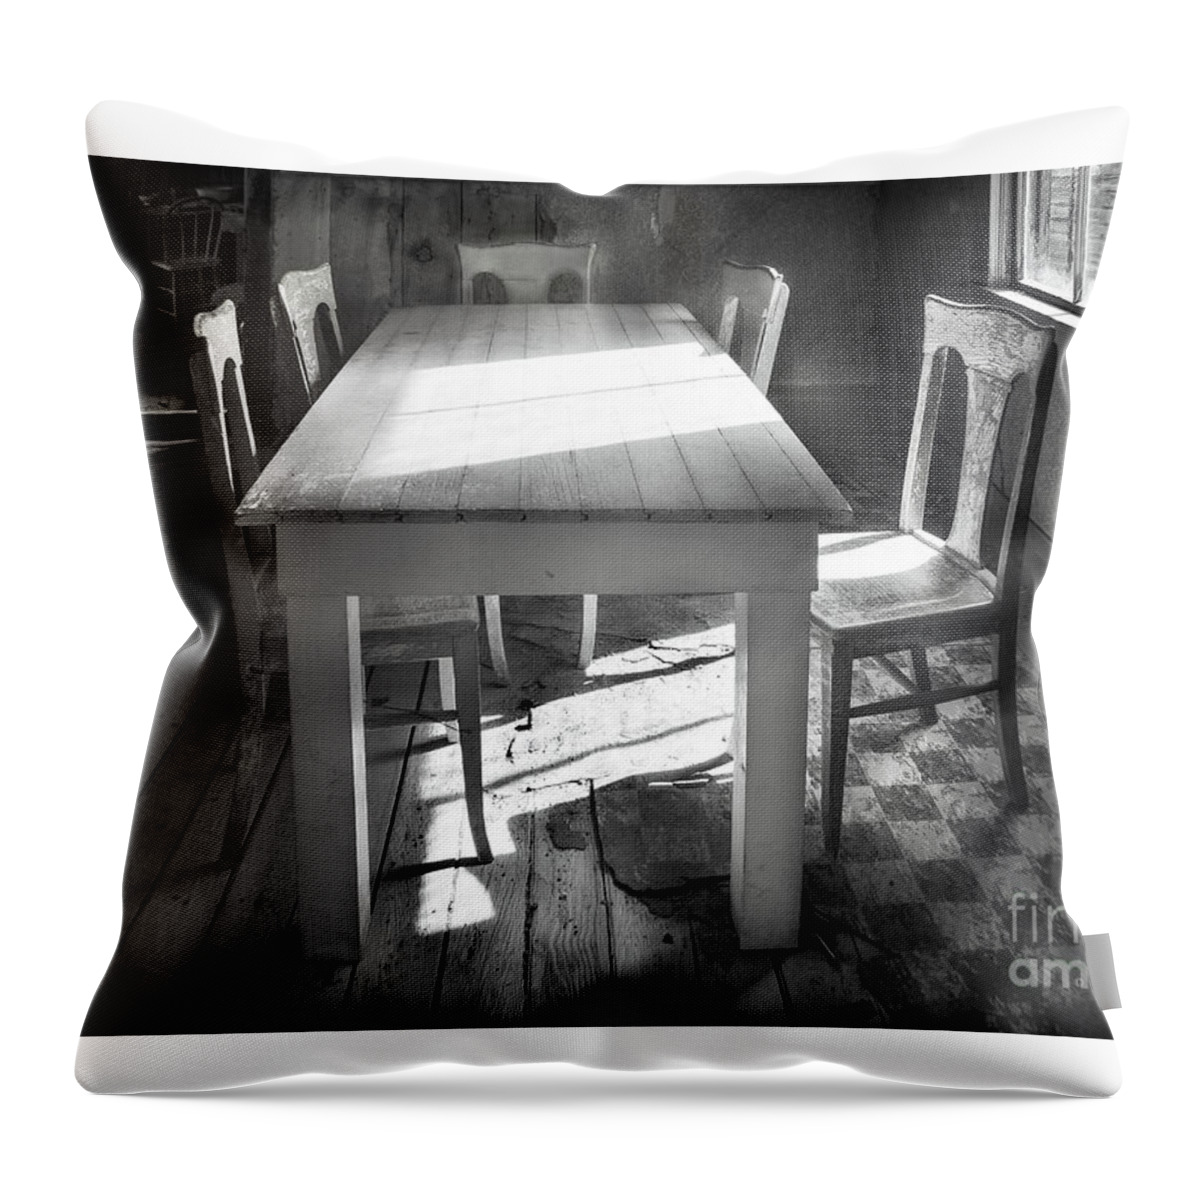 Tranquility Throw Pillow featuring the photograph Bodie Breakfast Table by Craig J Satterlee